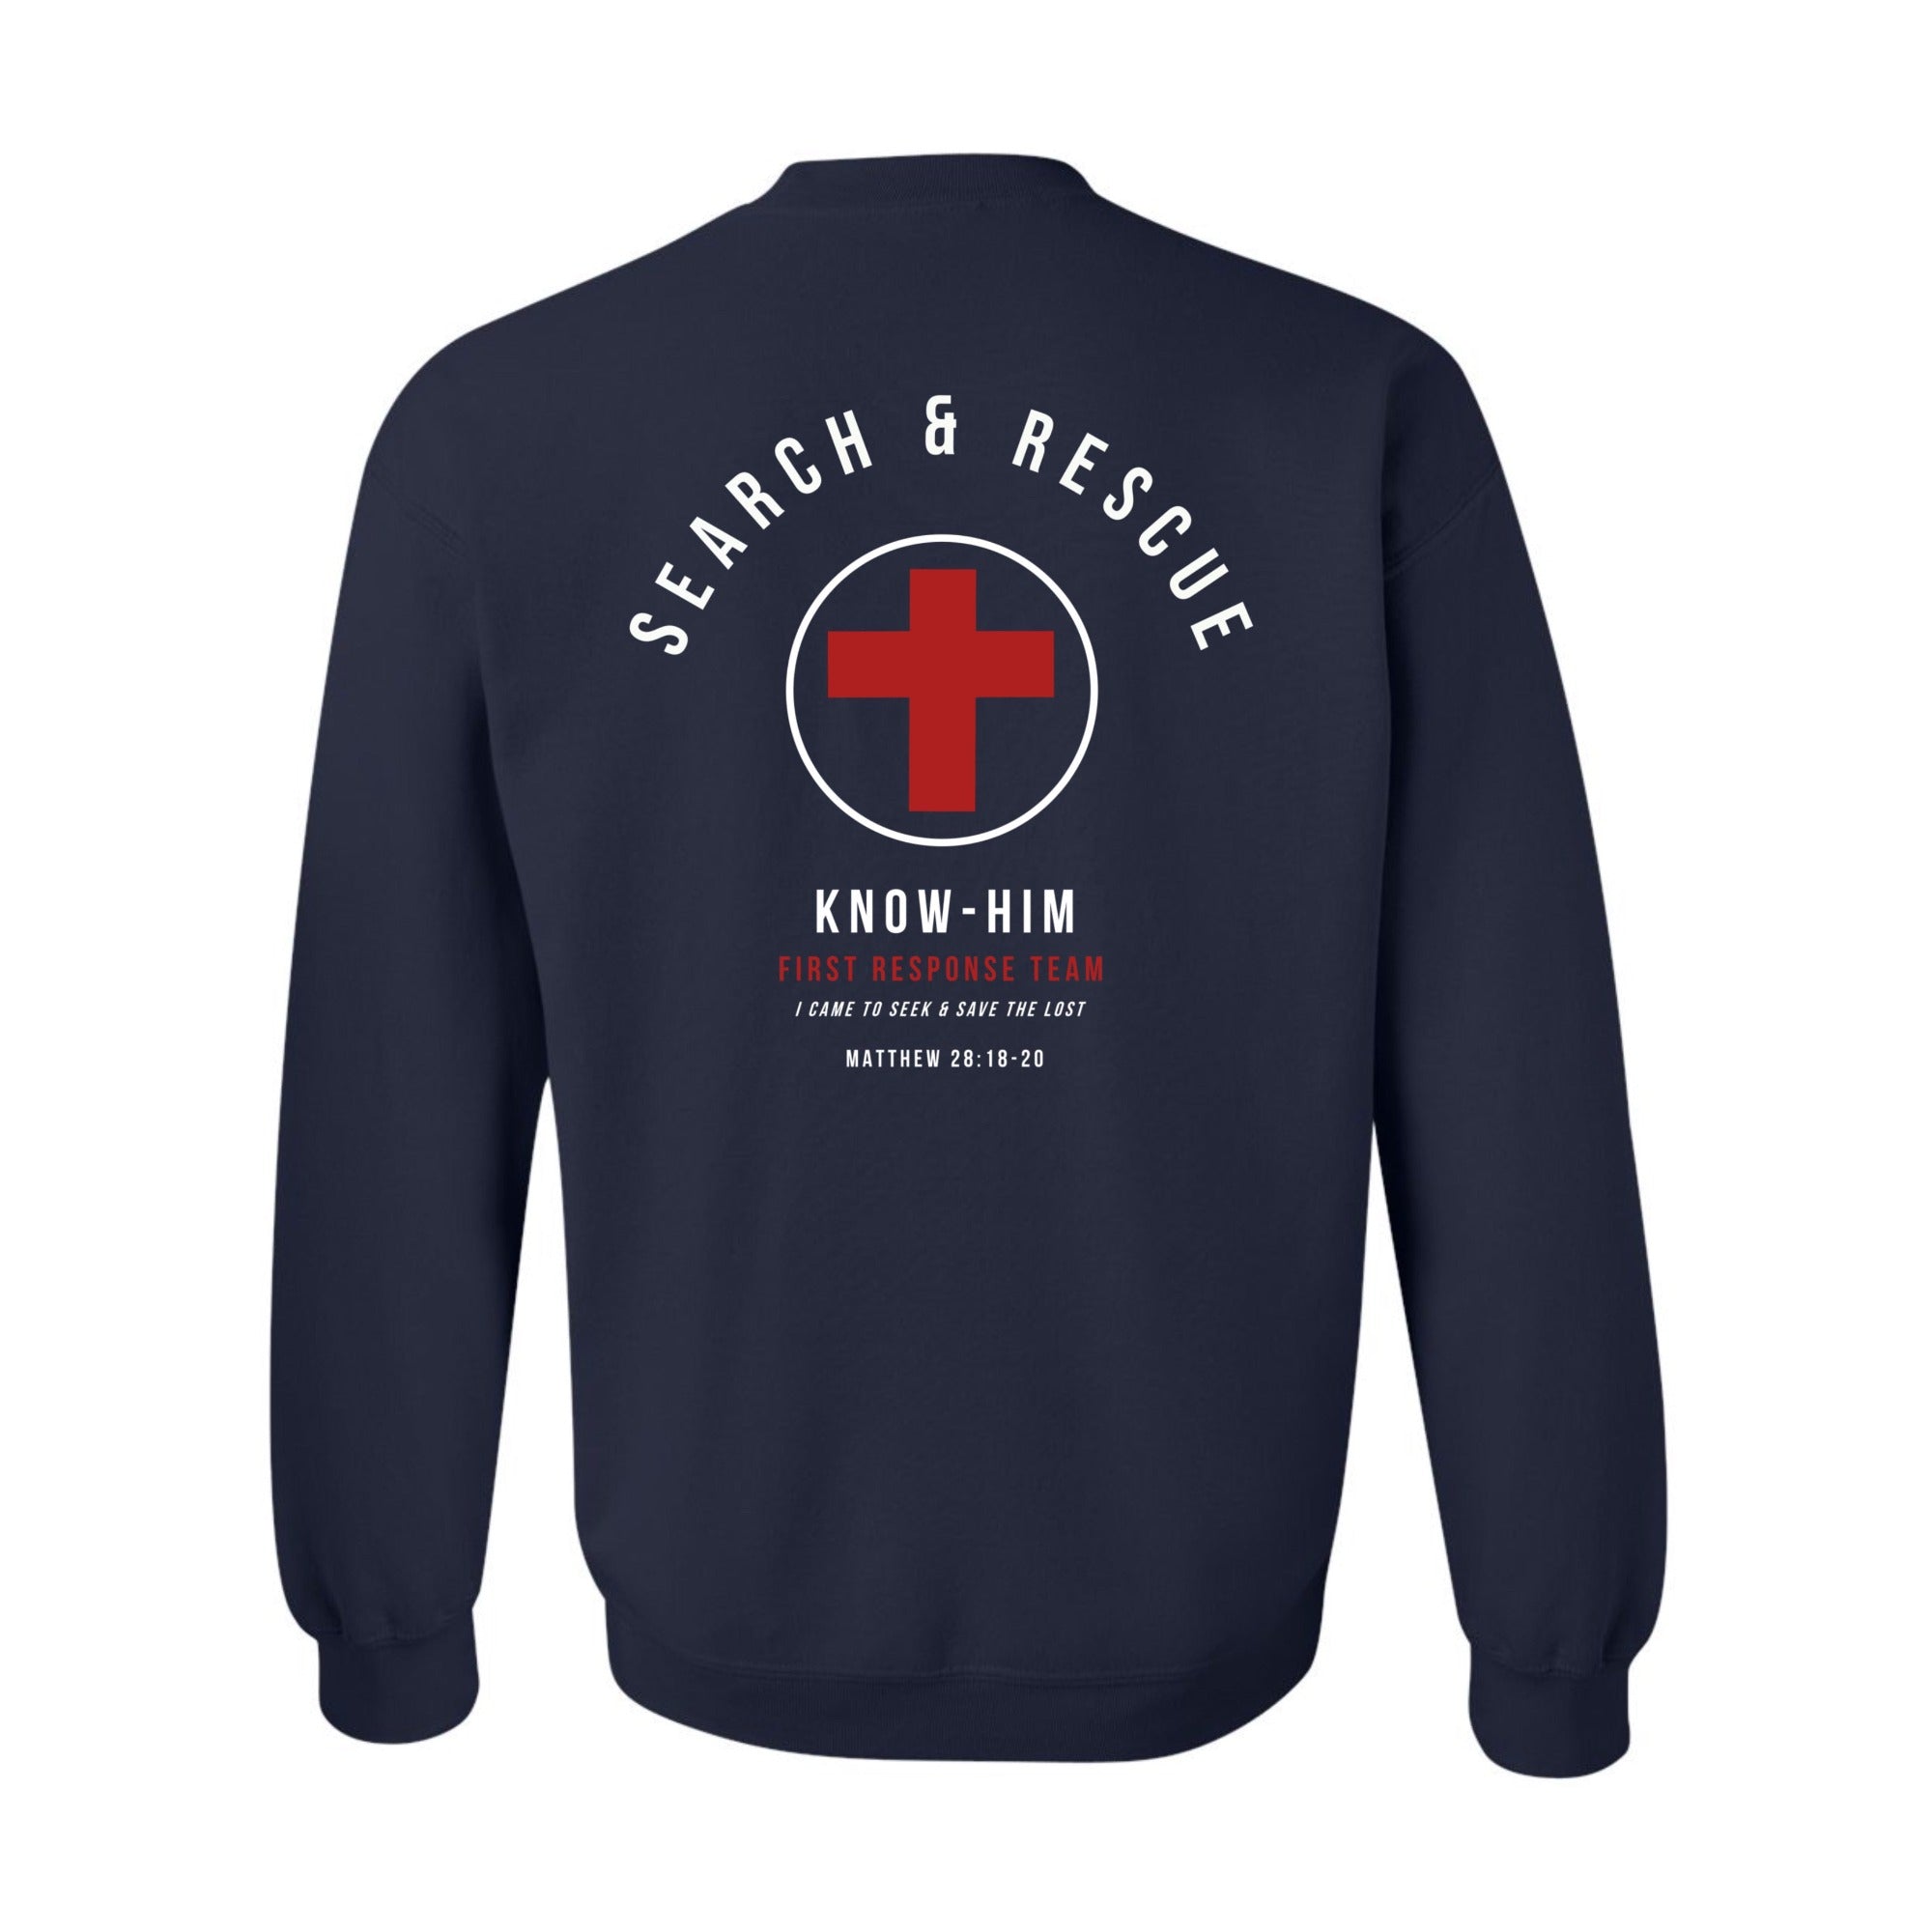 Search and Rescue (Midnight Blue) - Crewneck